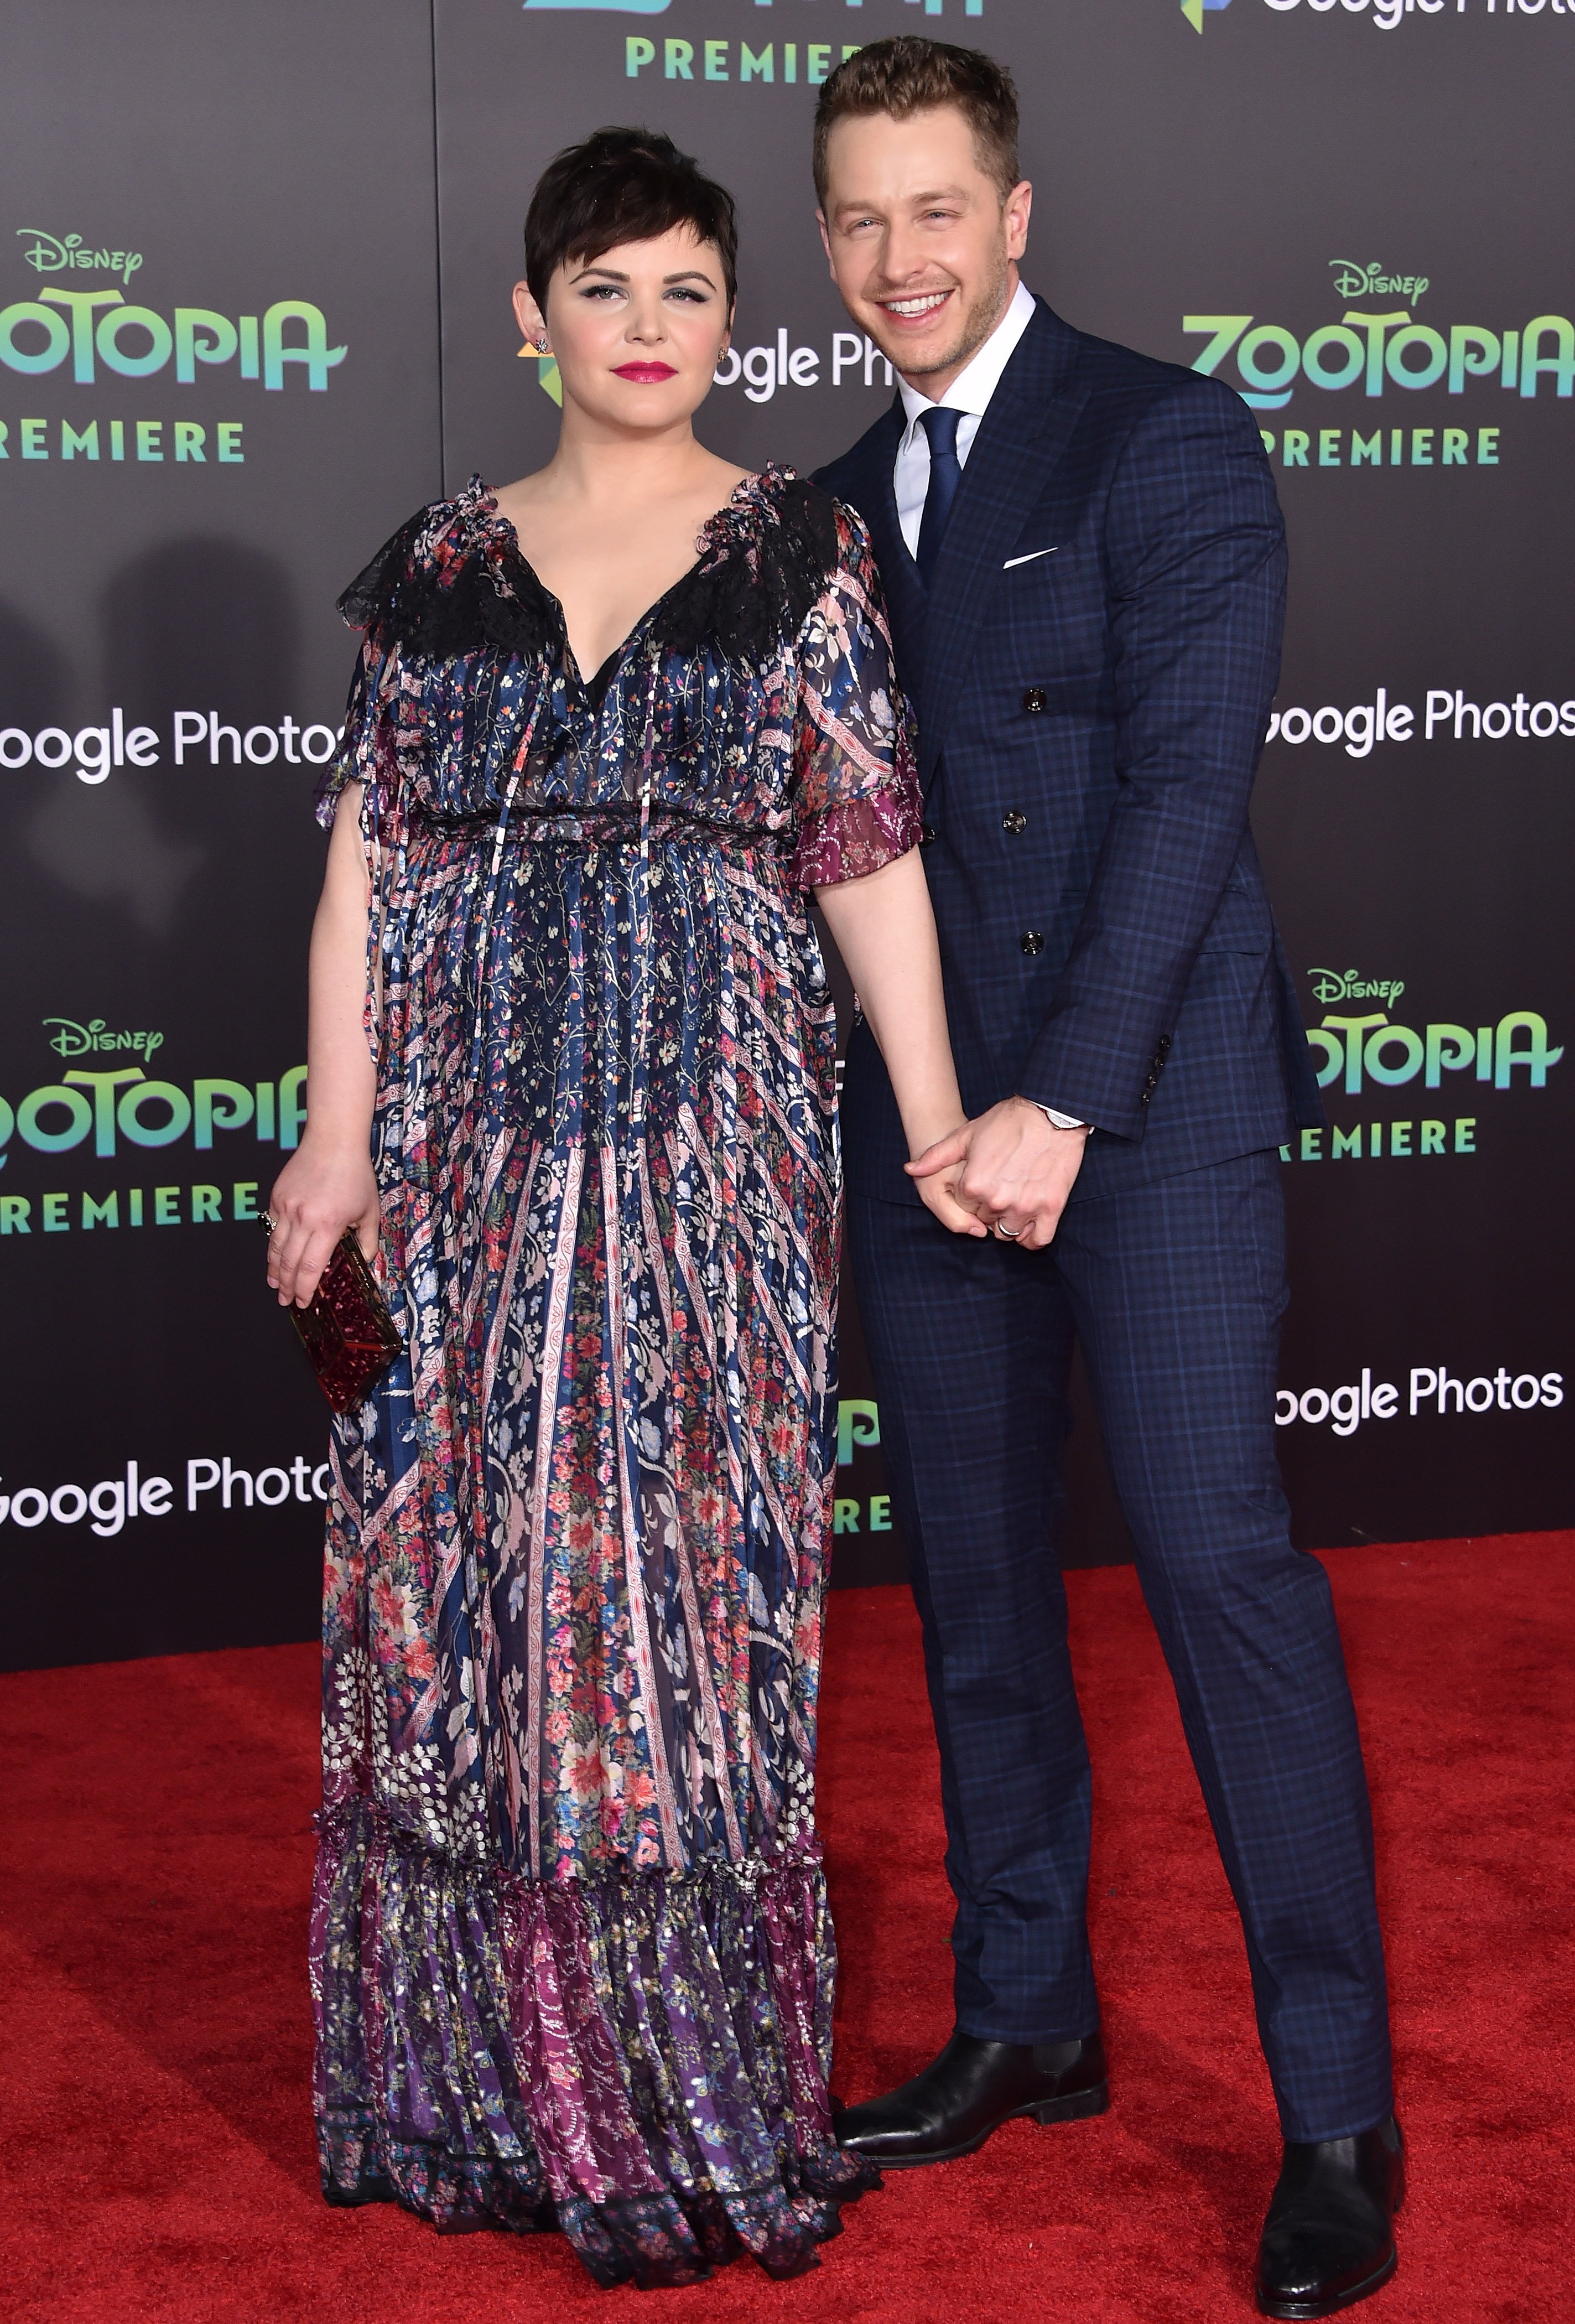 Josh Dallas and Ginnifer Goodwin, 2016. | Source: Getty Images